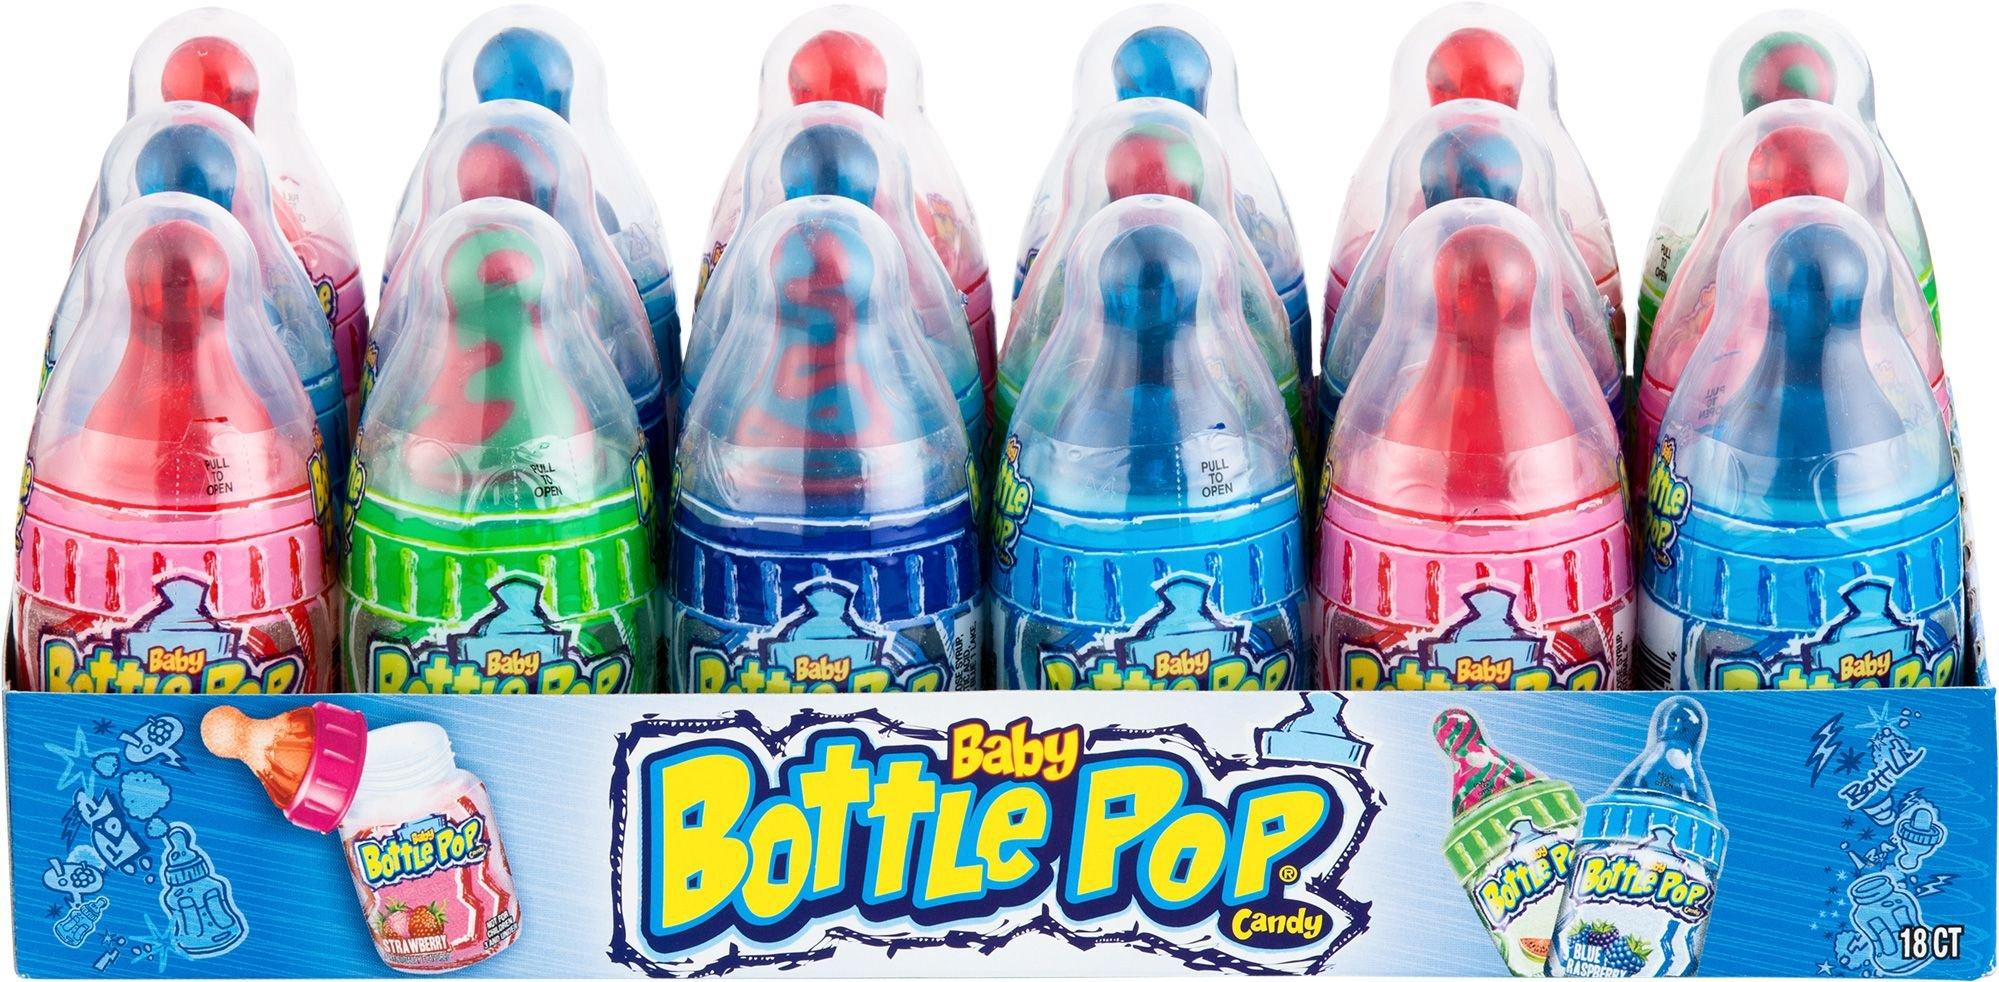 Baby Bottle Pops Candy 1.1 oz. - All City Candy